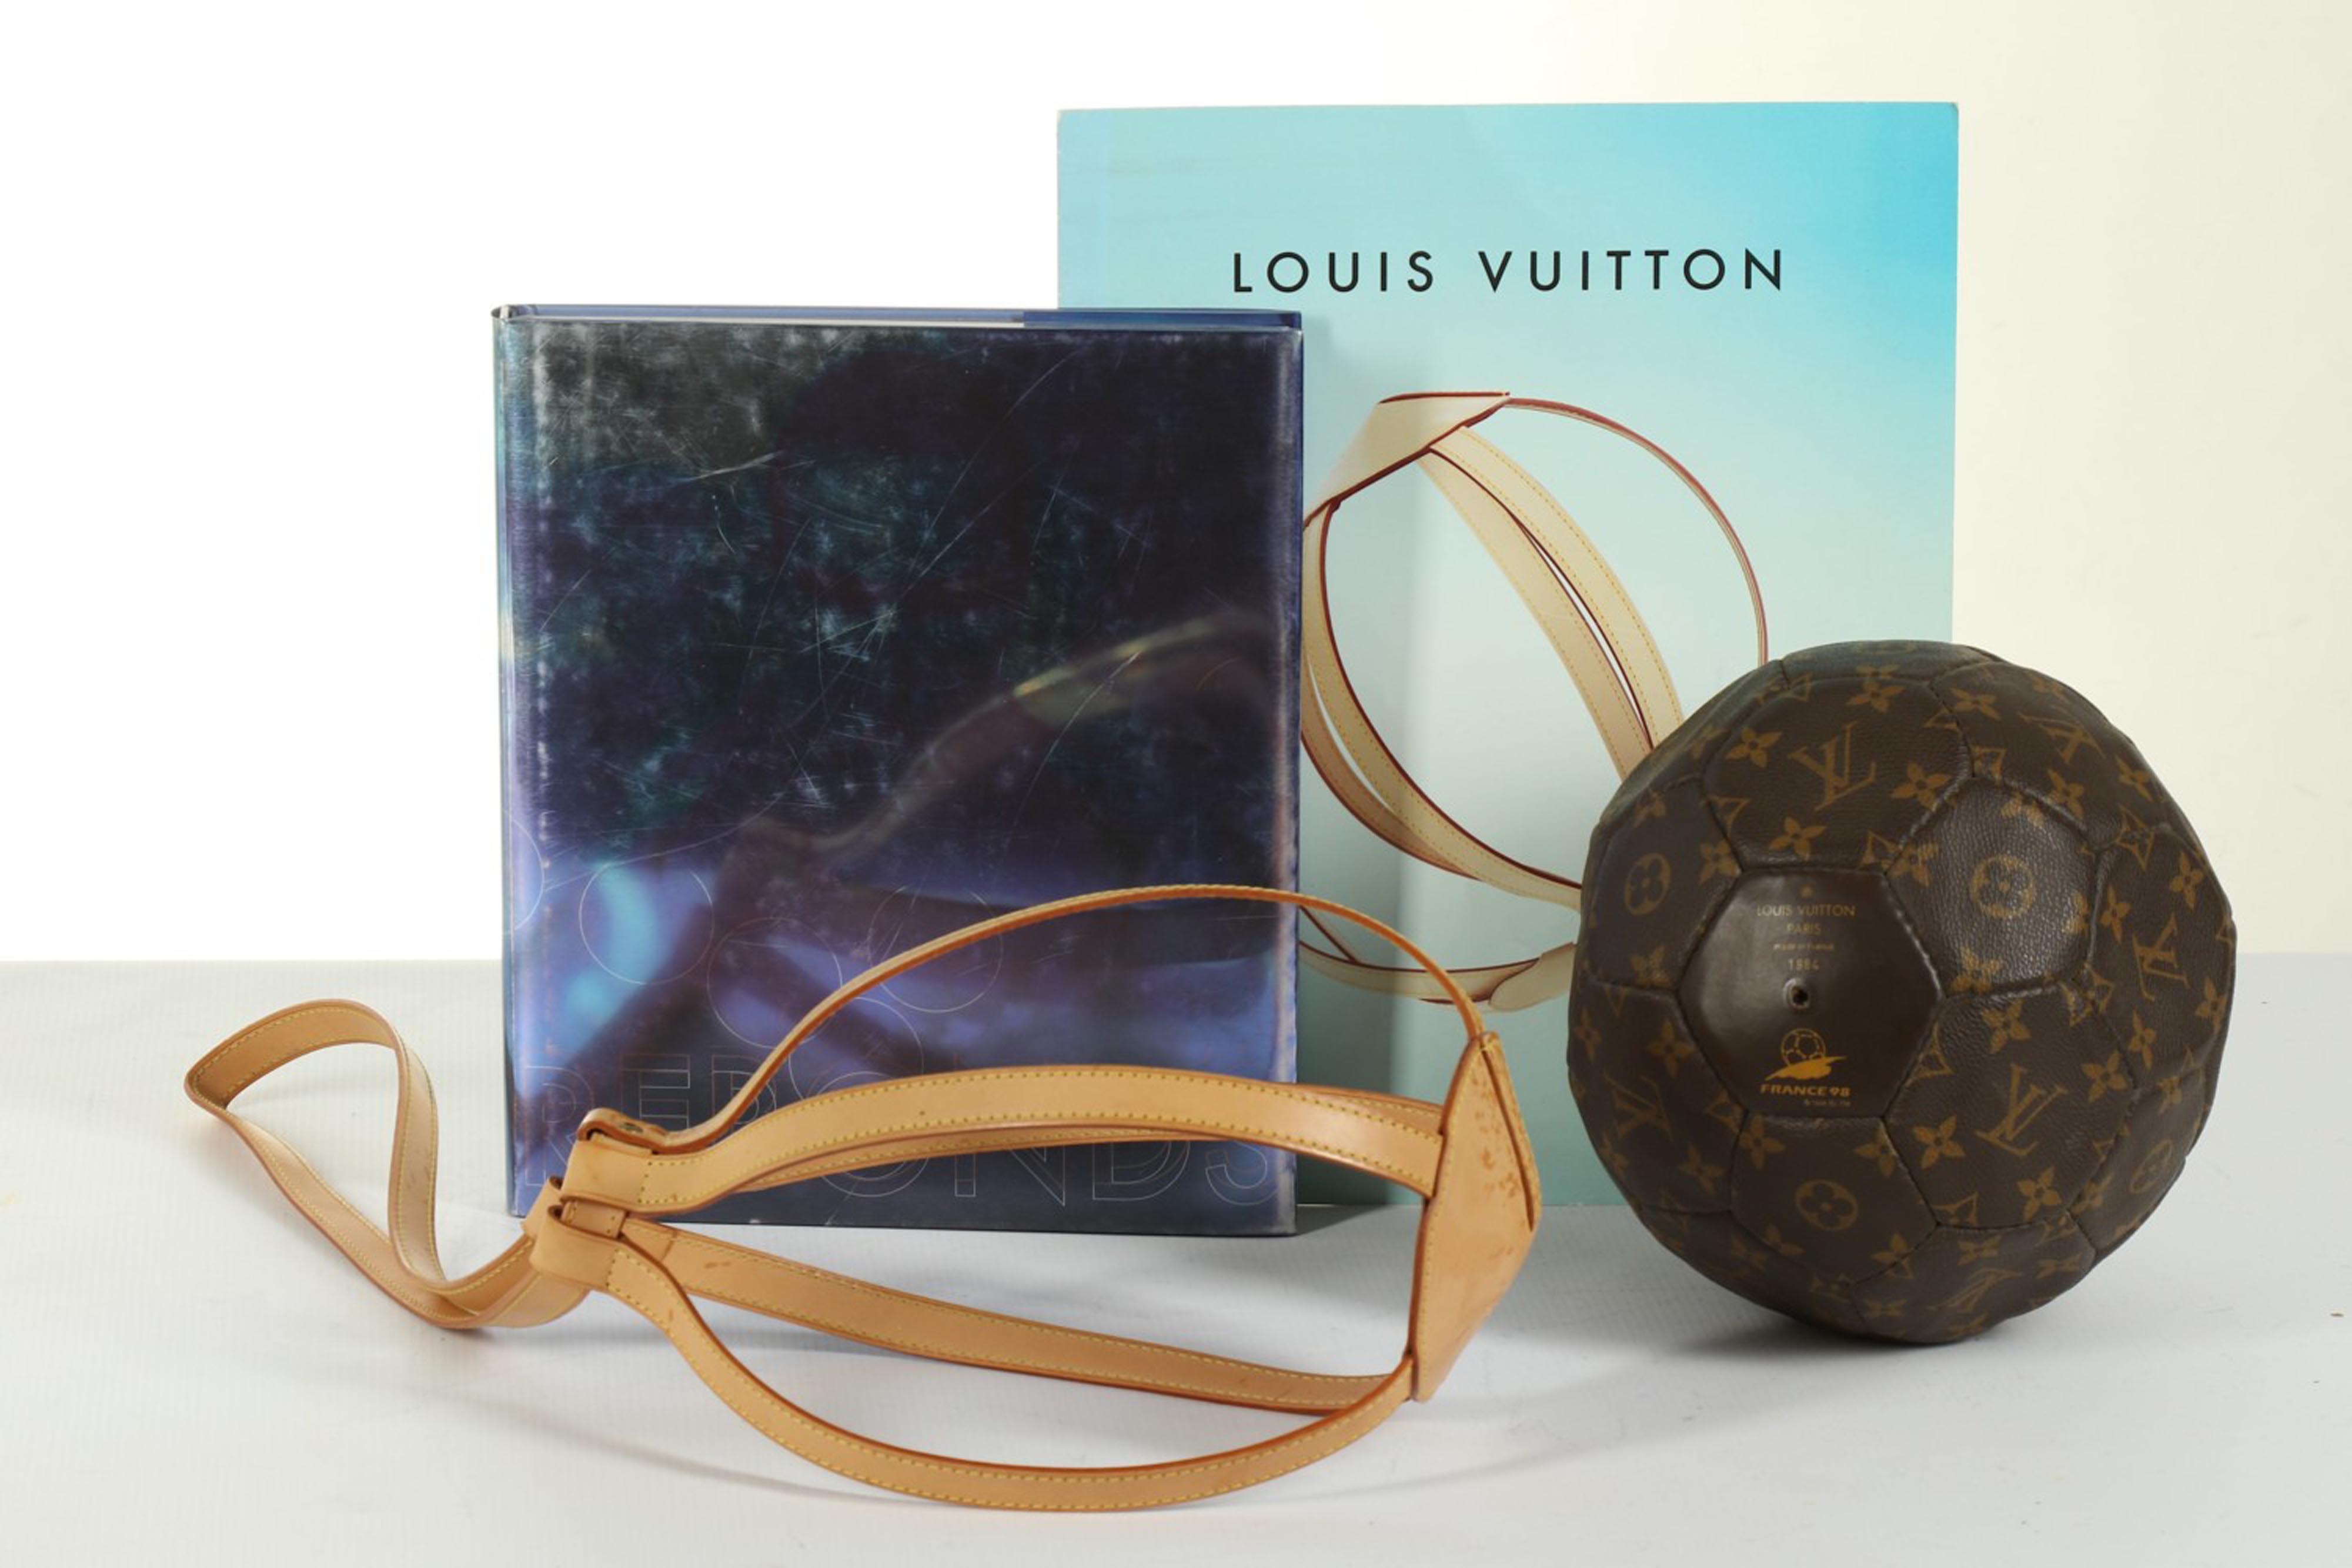 NWT LOUIS VUITTON SOCCER BALL LIMITED EDITION MONOGRAM 1998 WORLD CUP